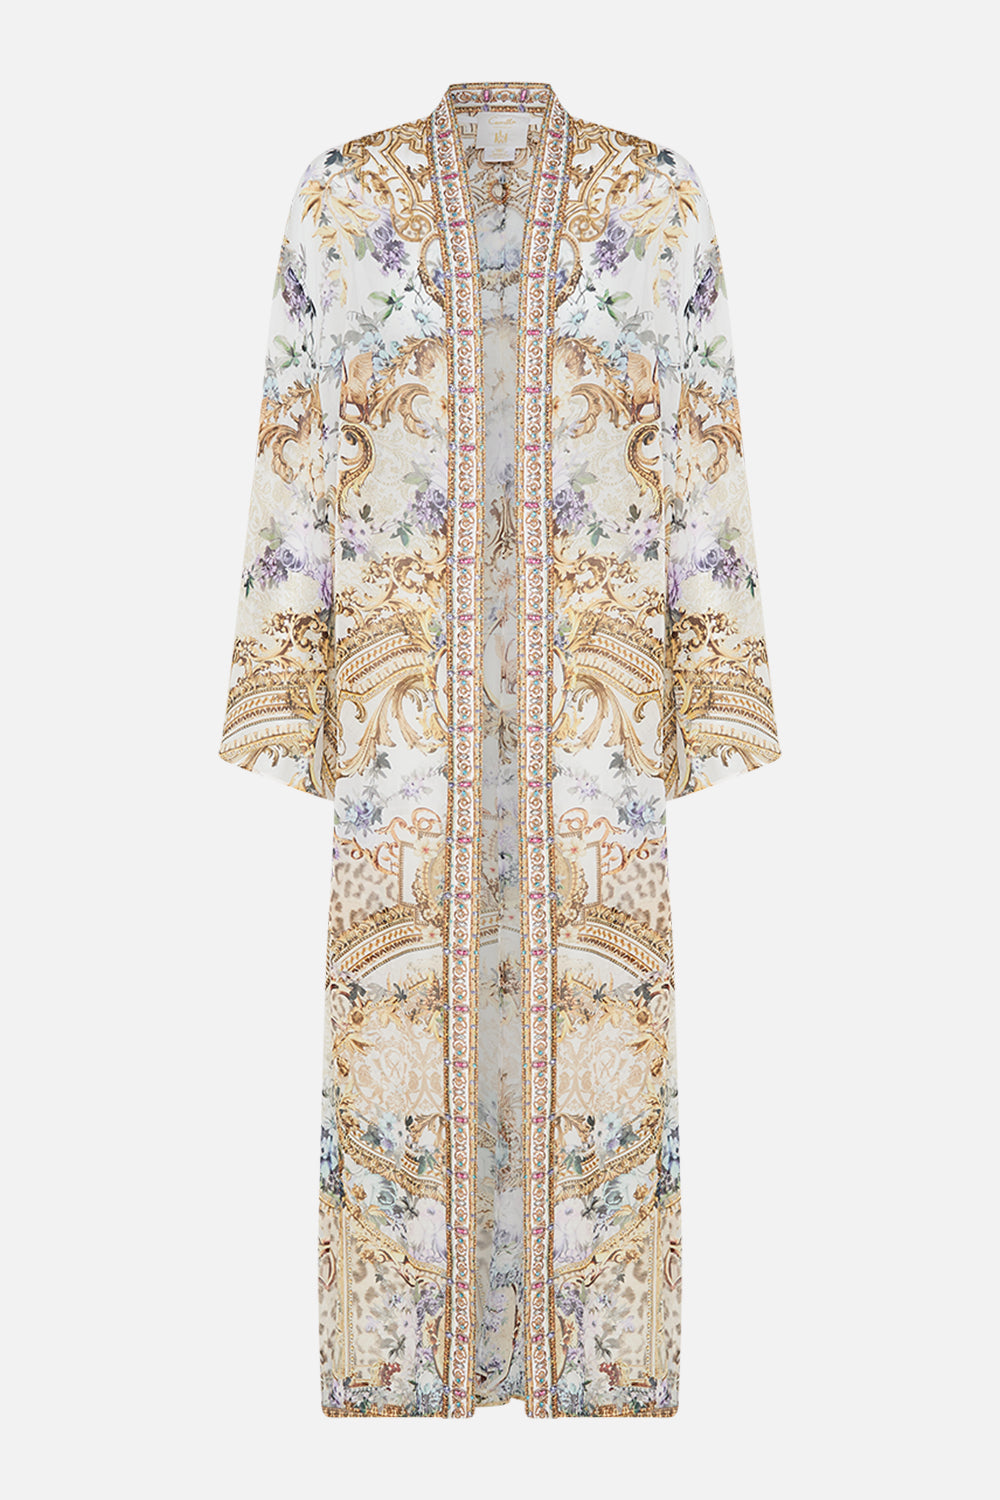 Product view of CAMILLA silk robe in Palazzo Playdate print 